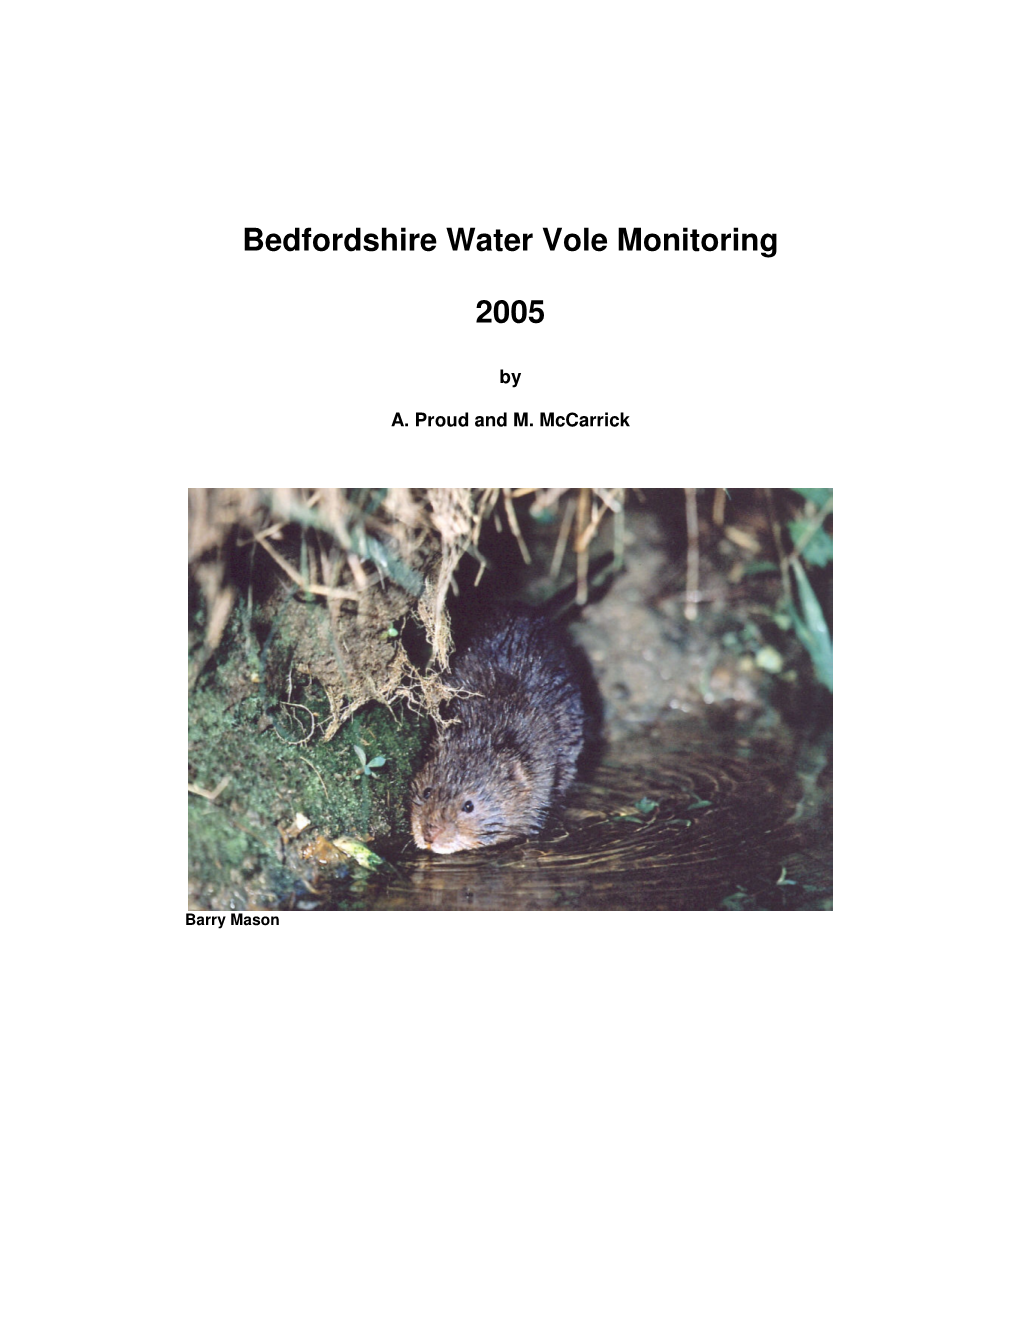 Bedfordshire Water Vole Monitoring 2005